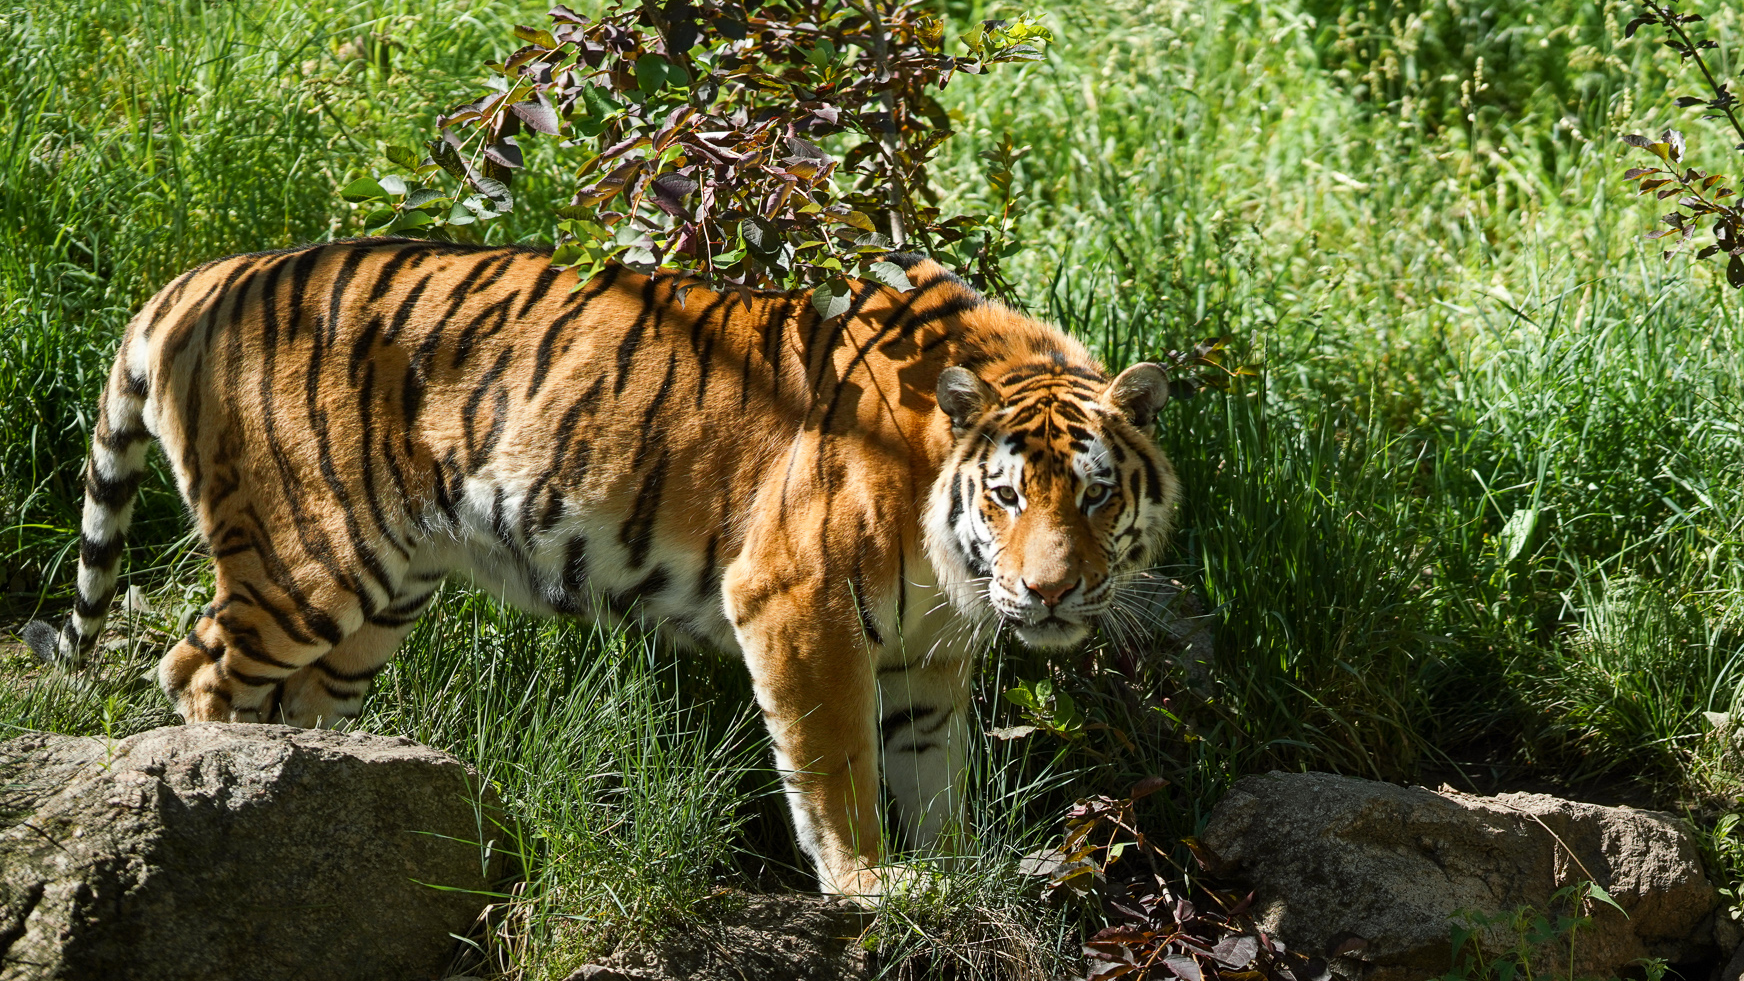 Amur tiger Chewy in the grass at Cheyenne Mountain Zoo